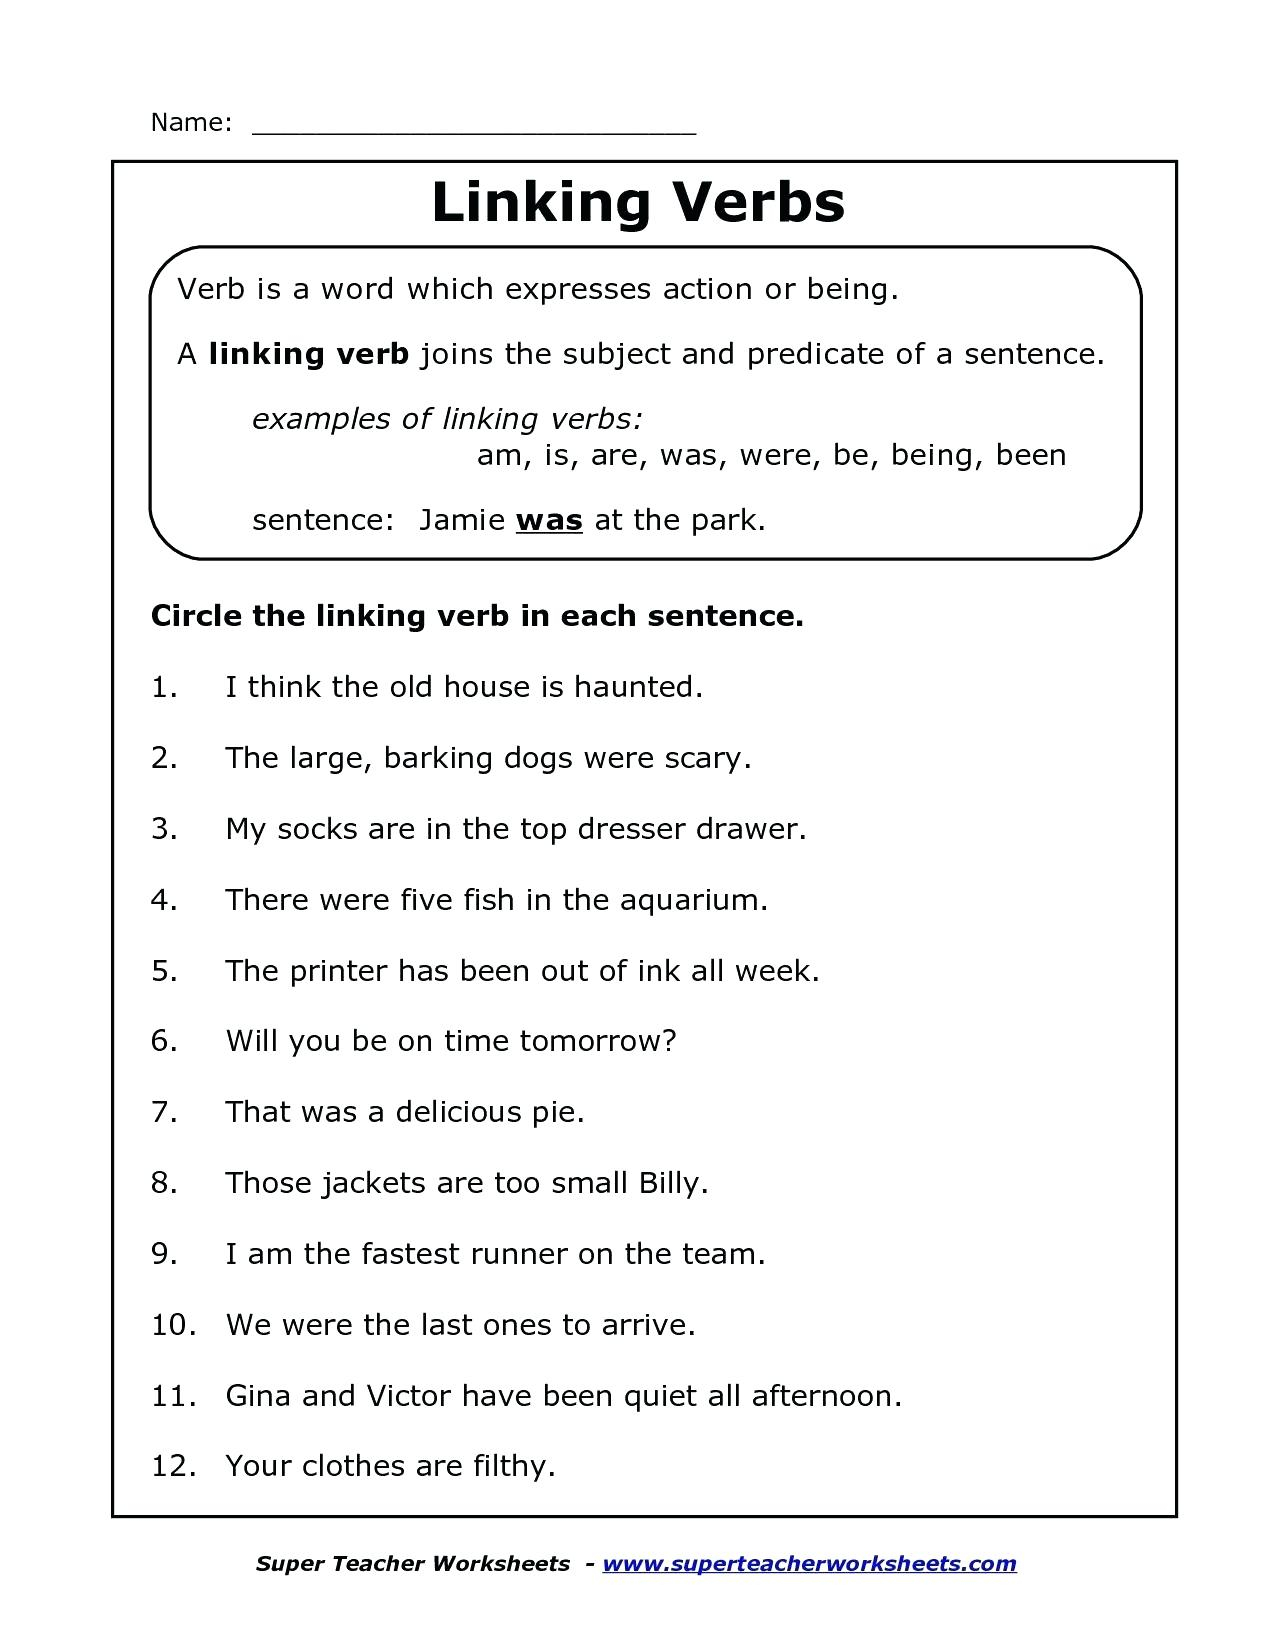 action-verbs-worksheets